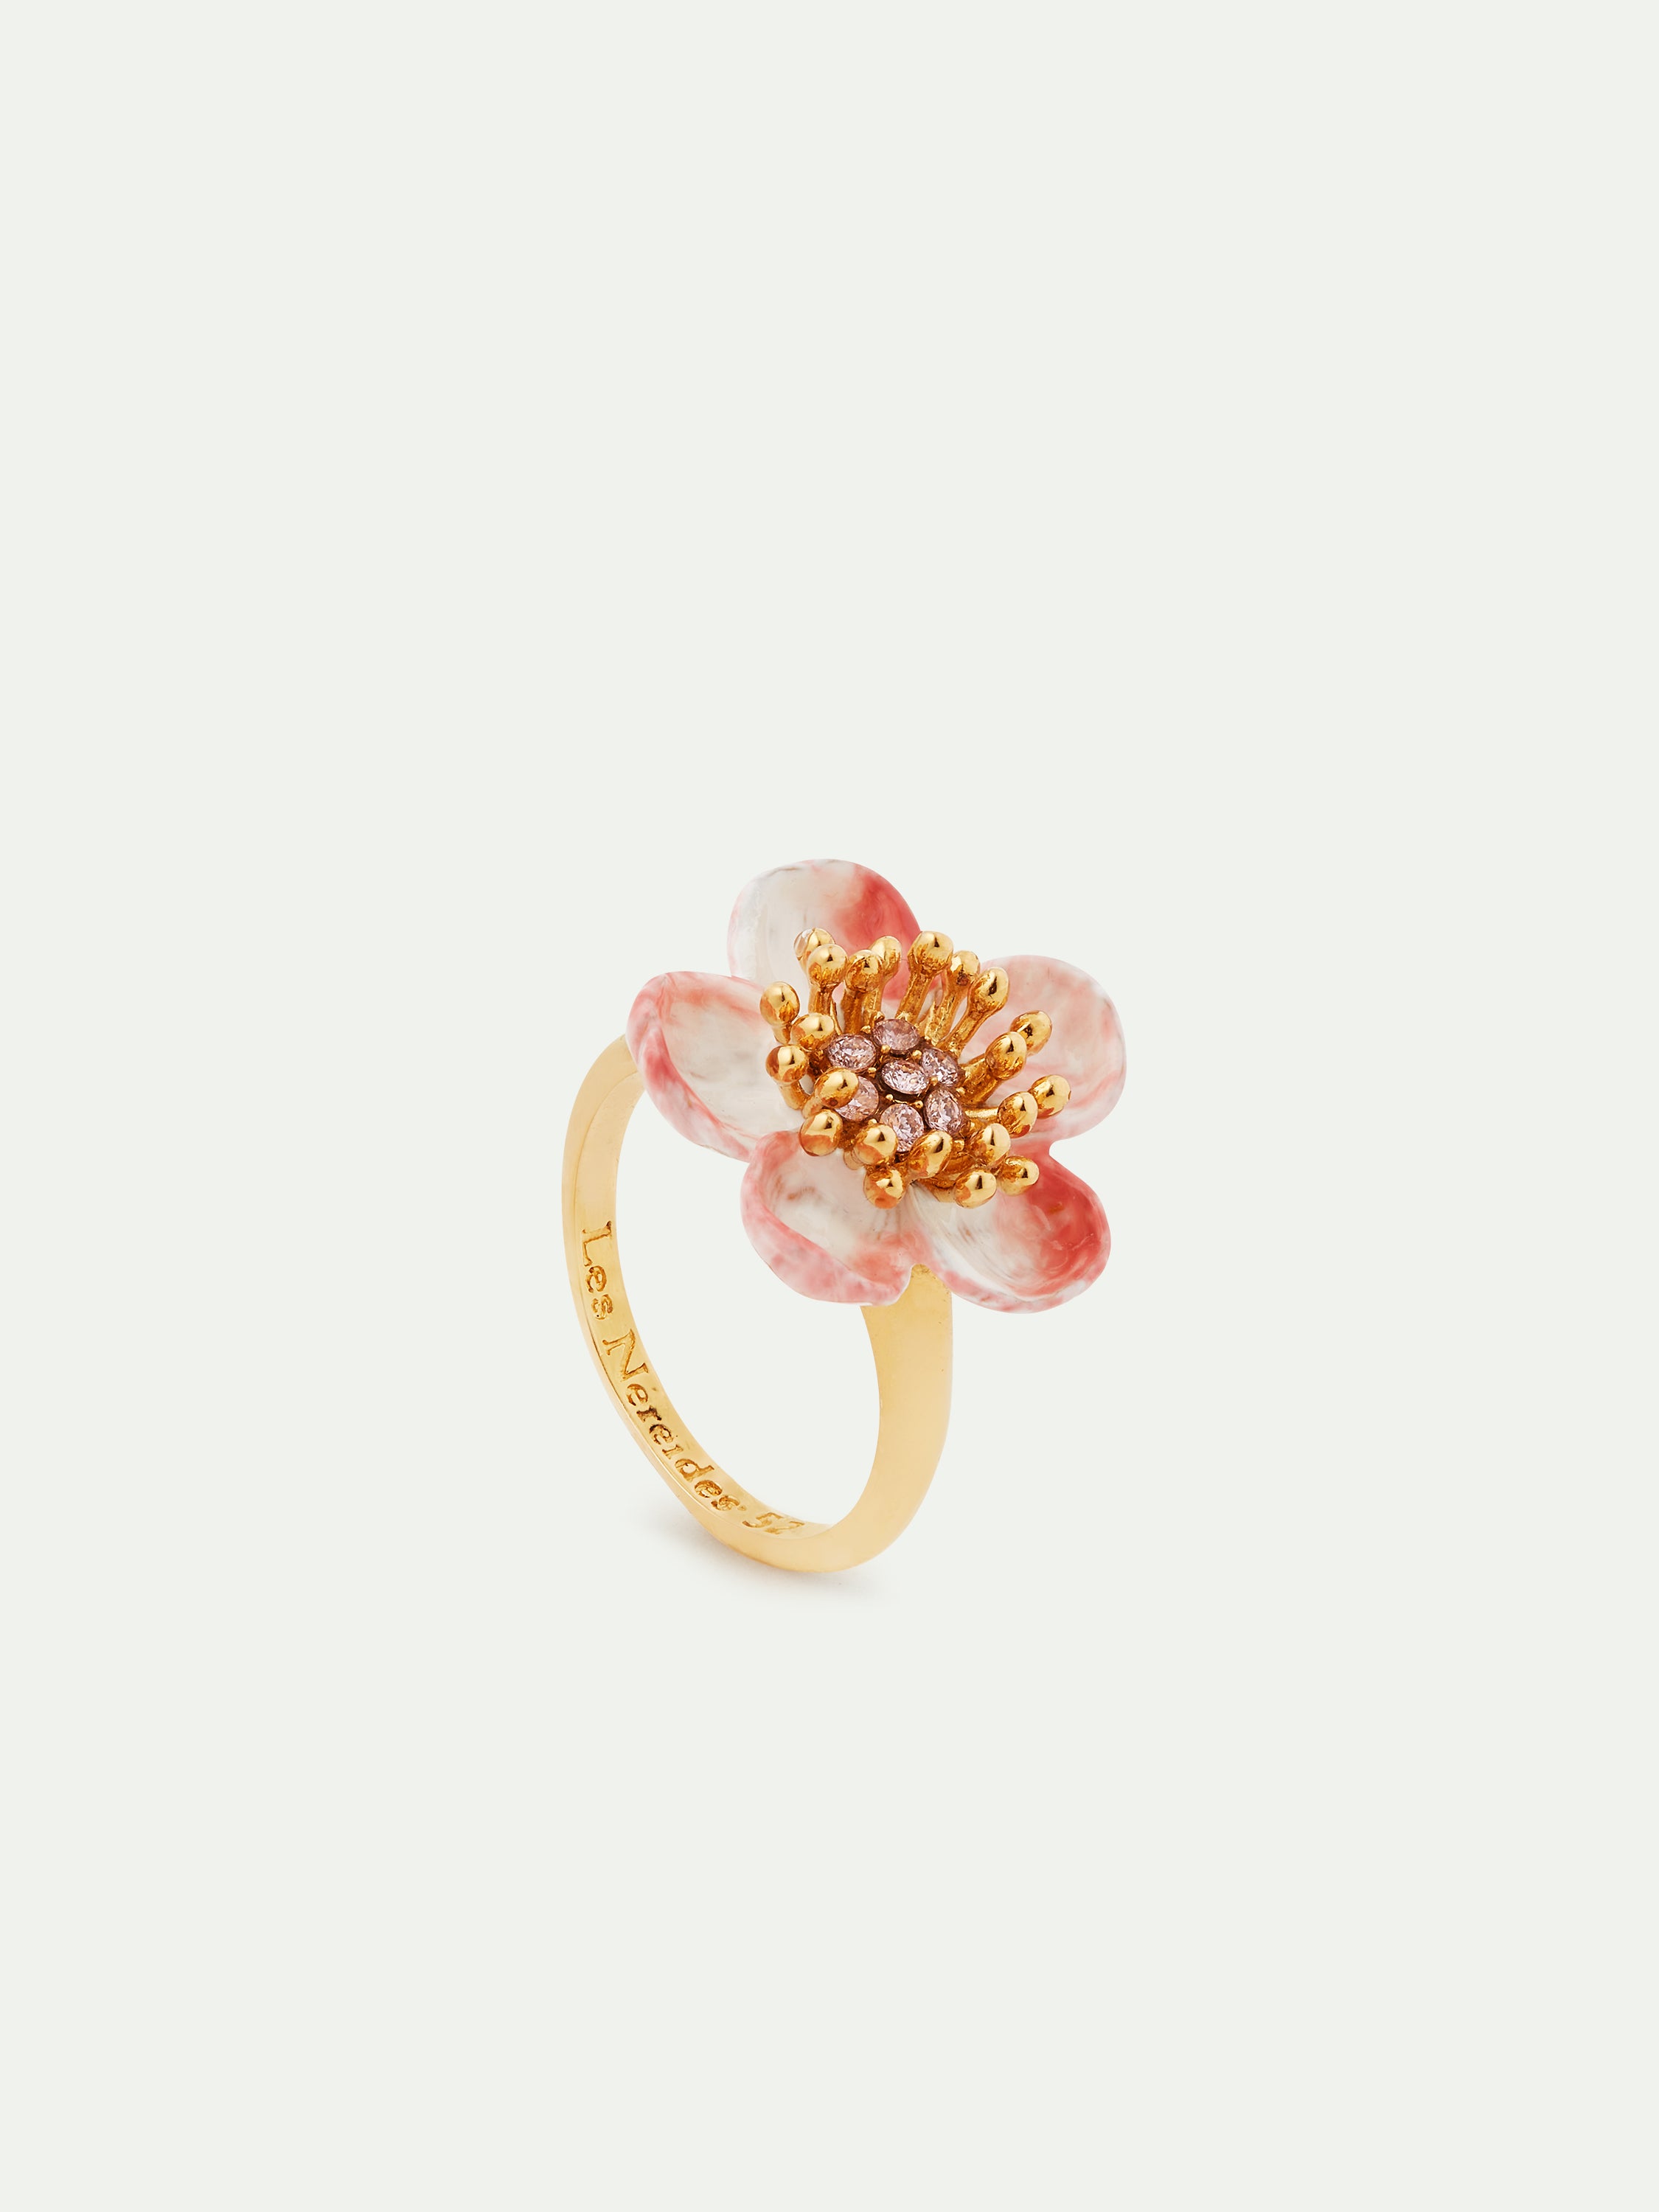 Apple blossom cocktail ring